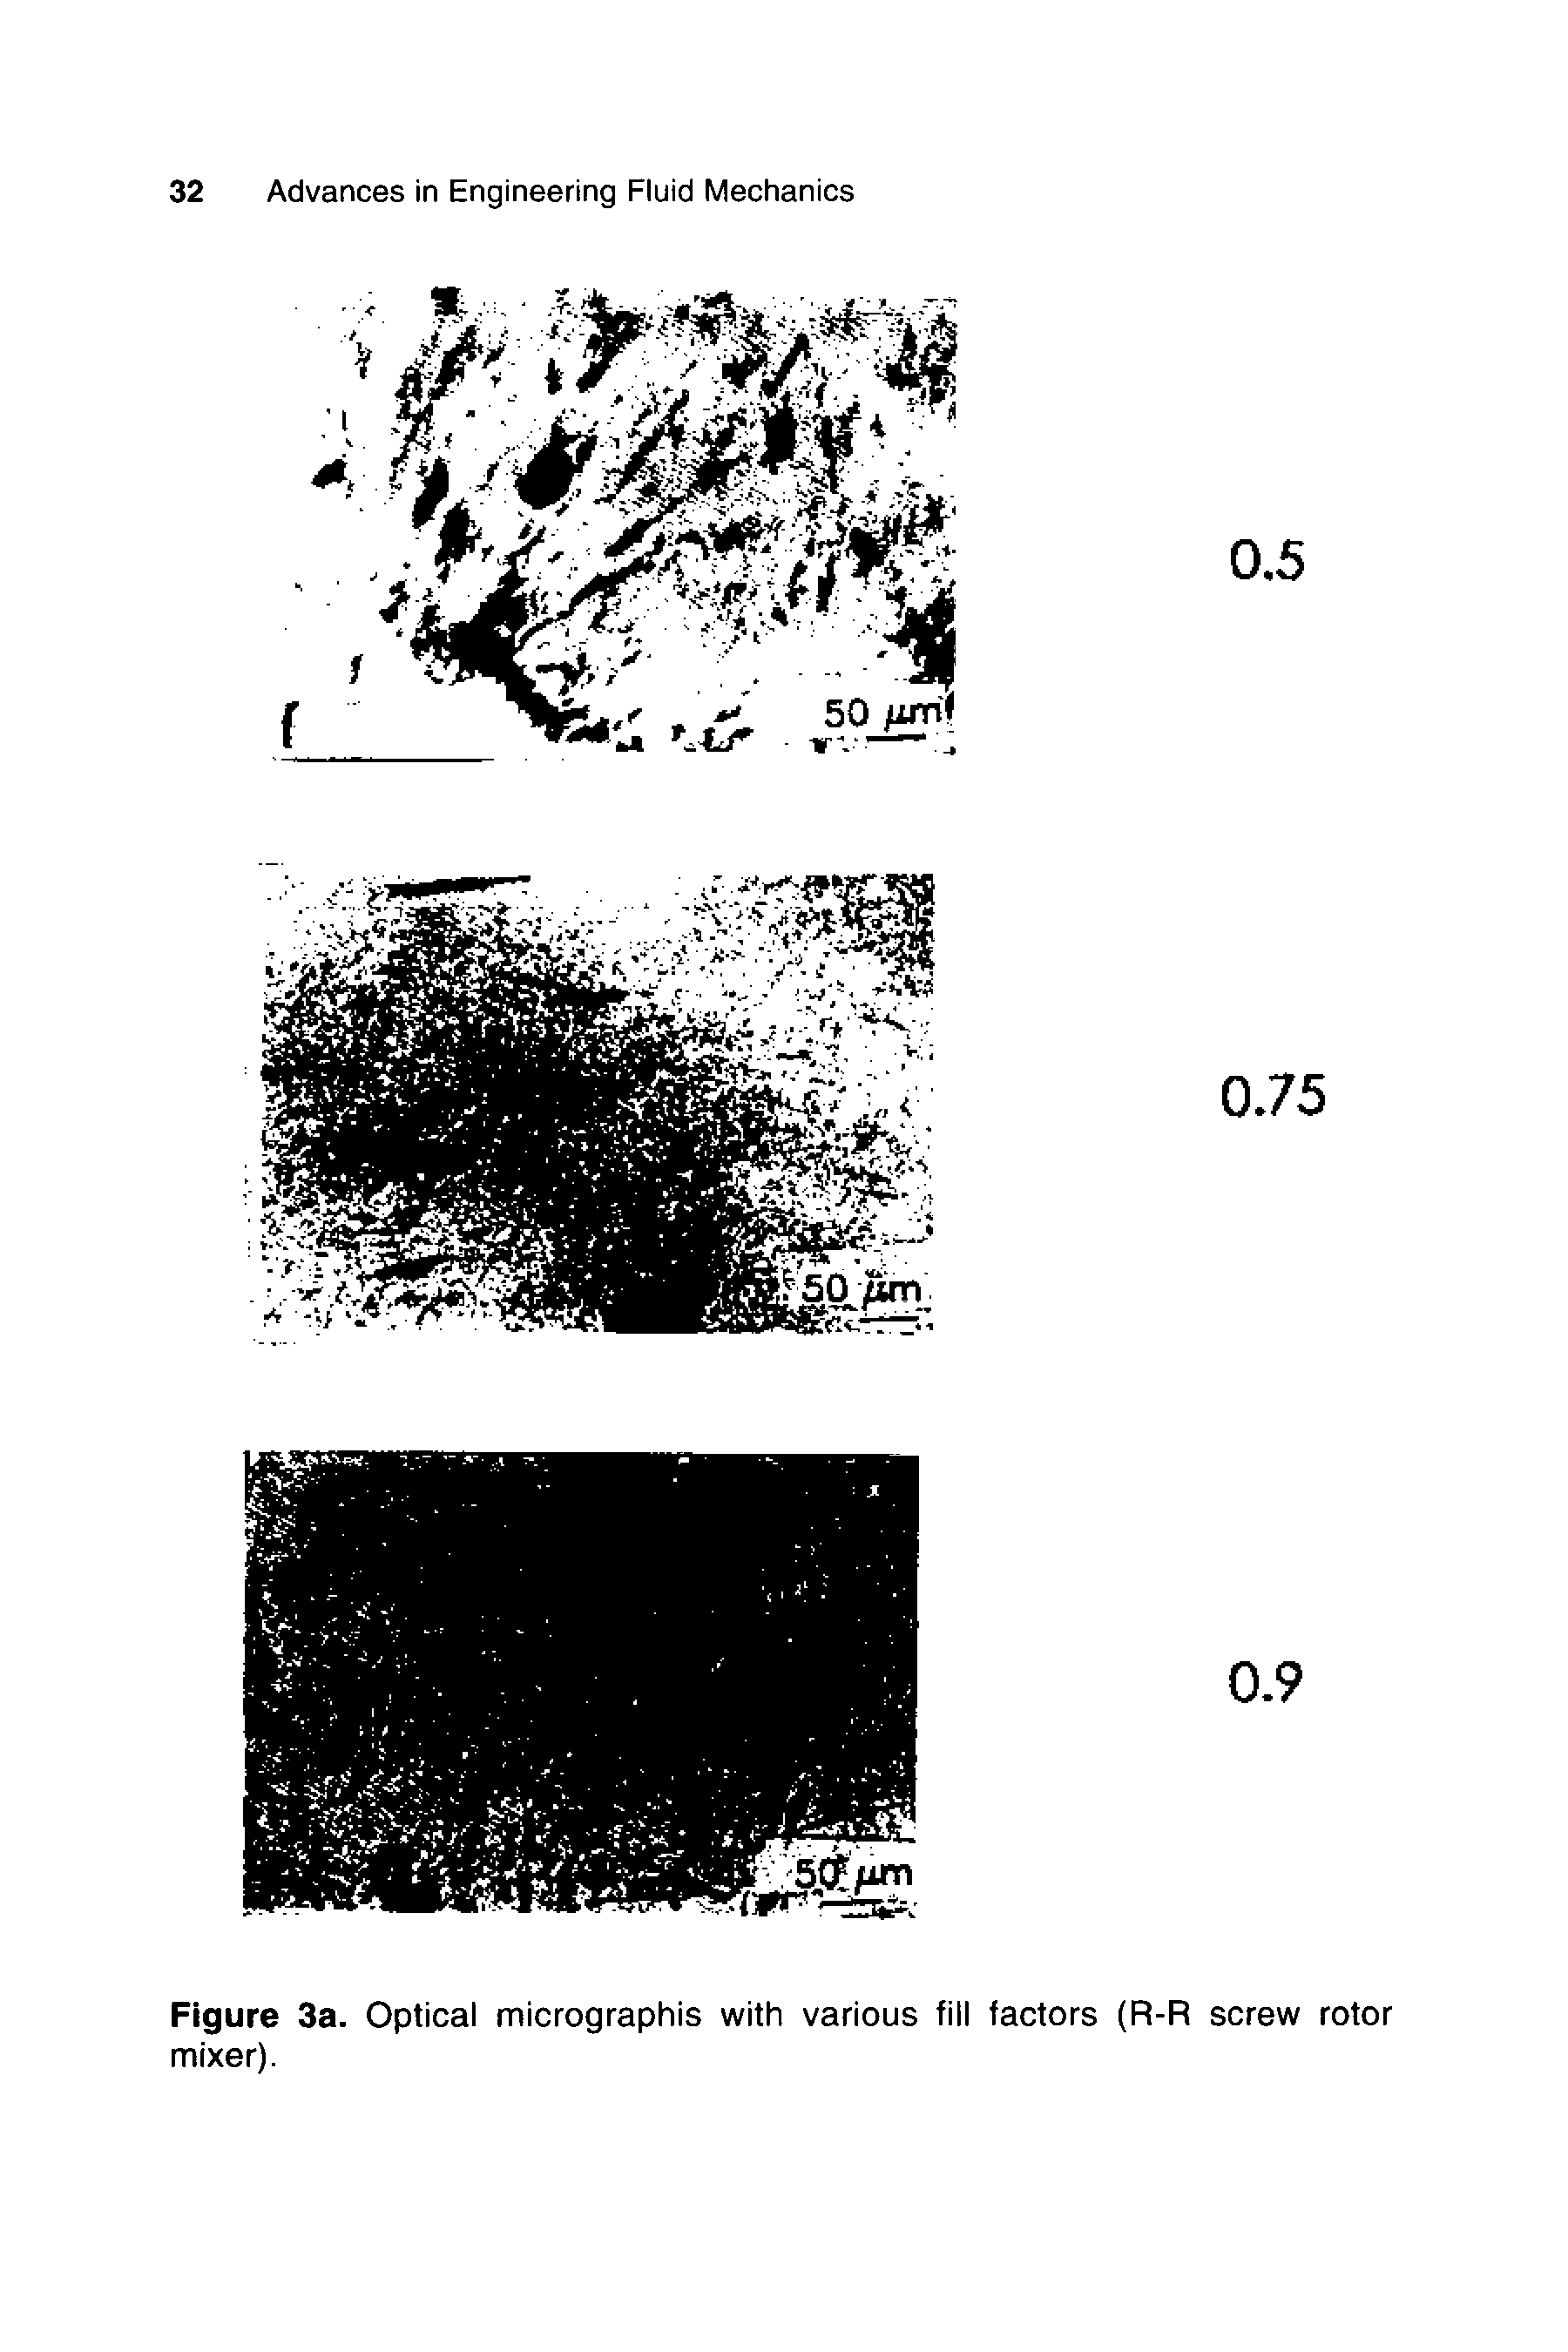 Figure 3a. Optical micrographis with various fill factors (R-R screw rotor mixer).